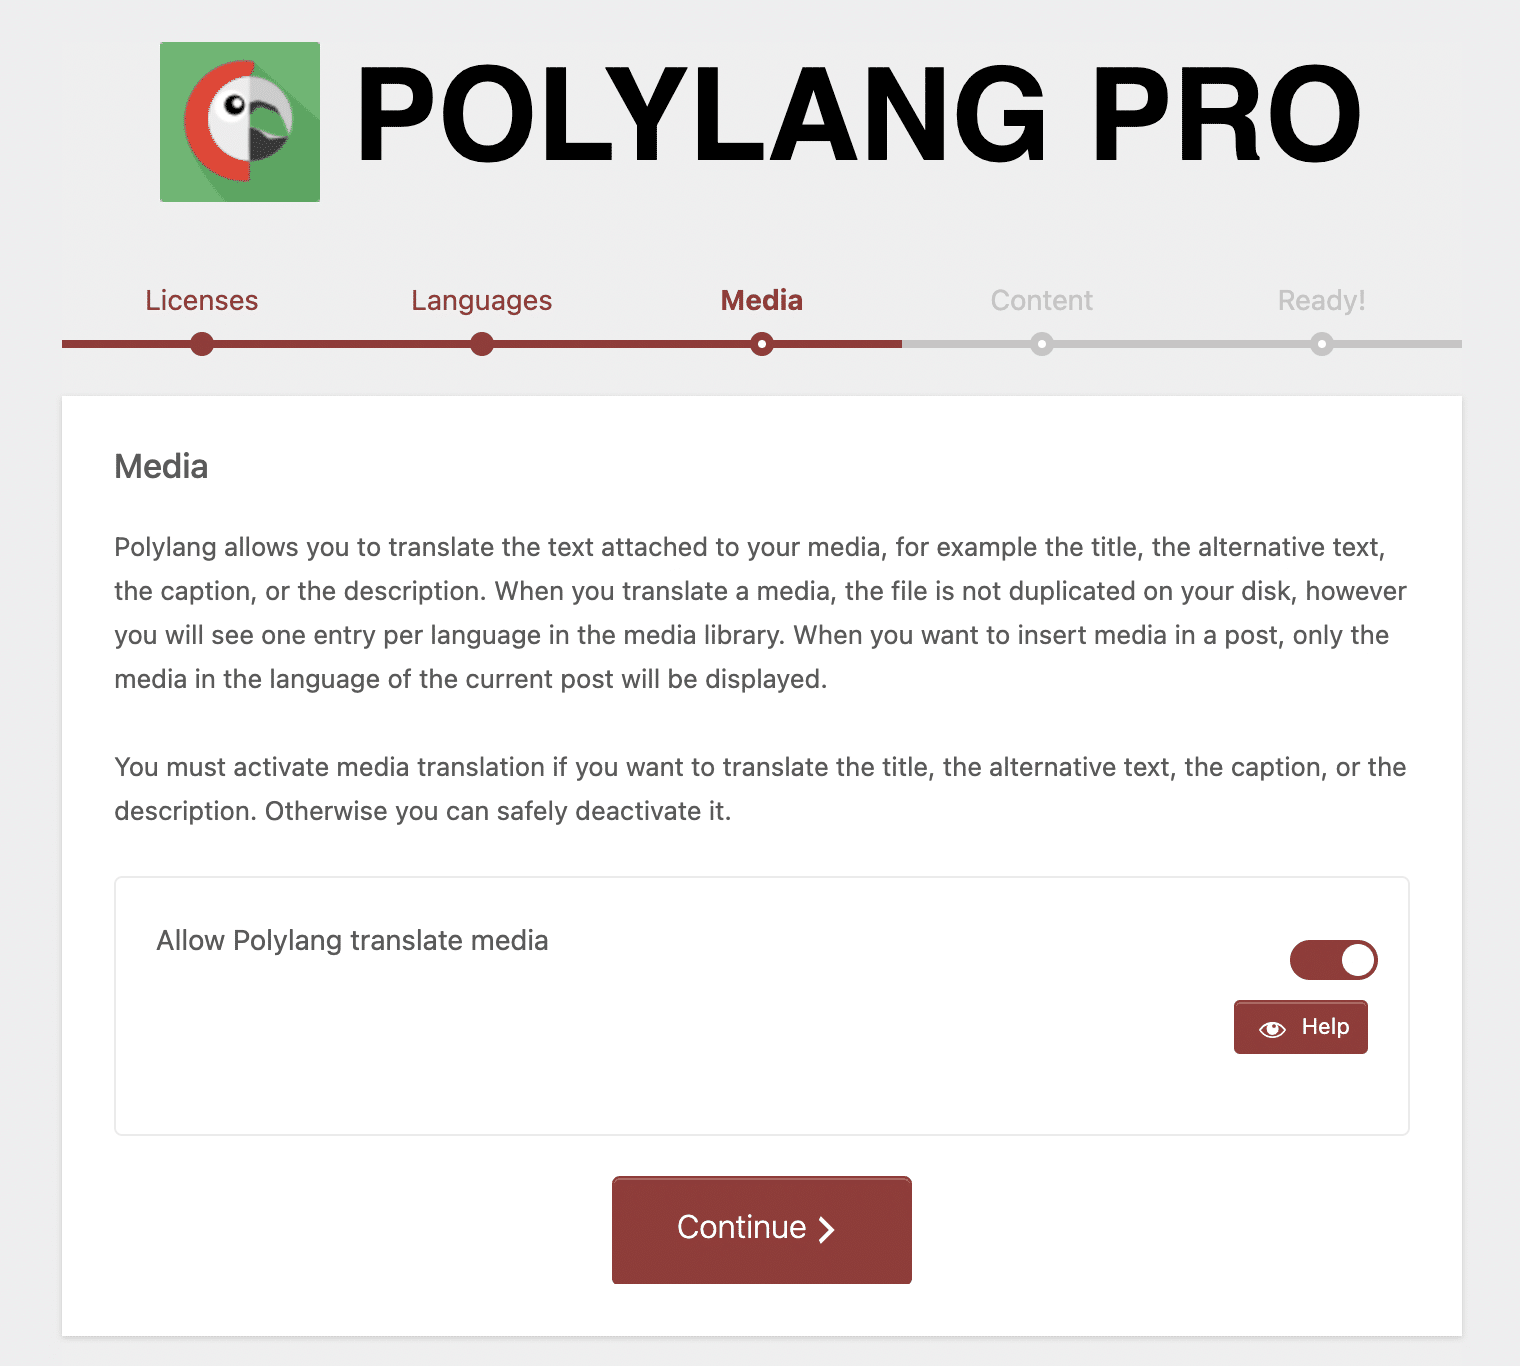 Allow Polylang to translate media or not.